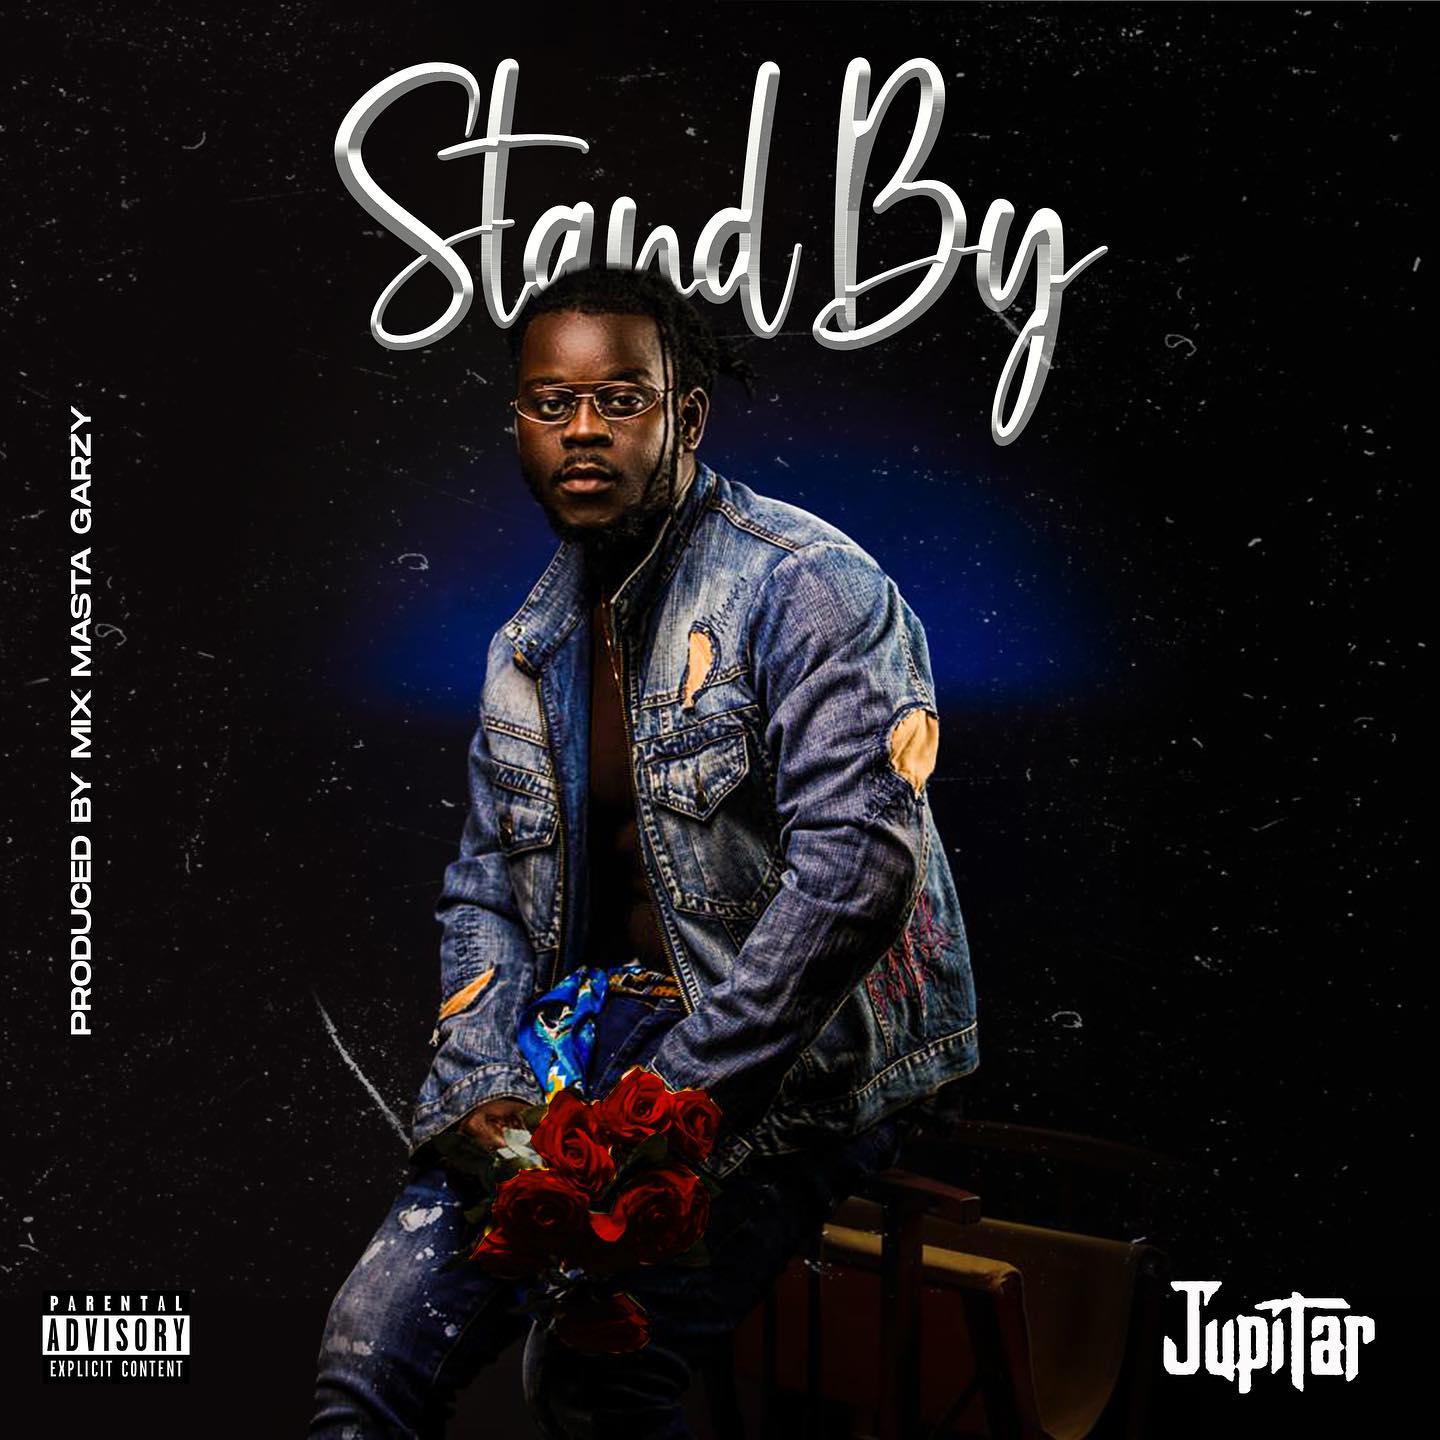 Download Jupitar-Stand By-Ghflamez.com-mp3-image